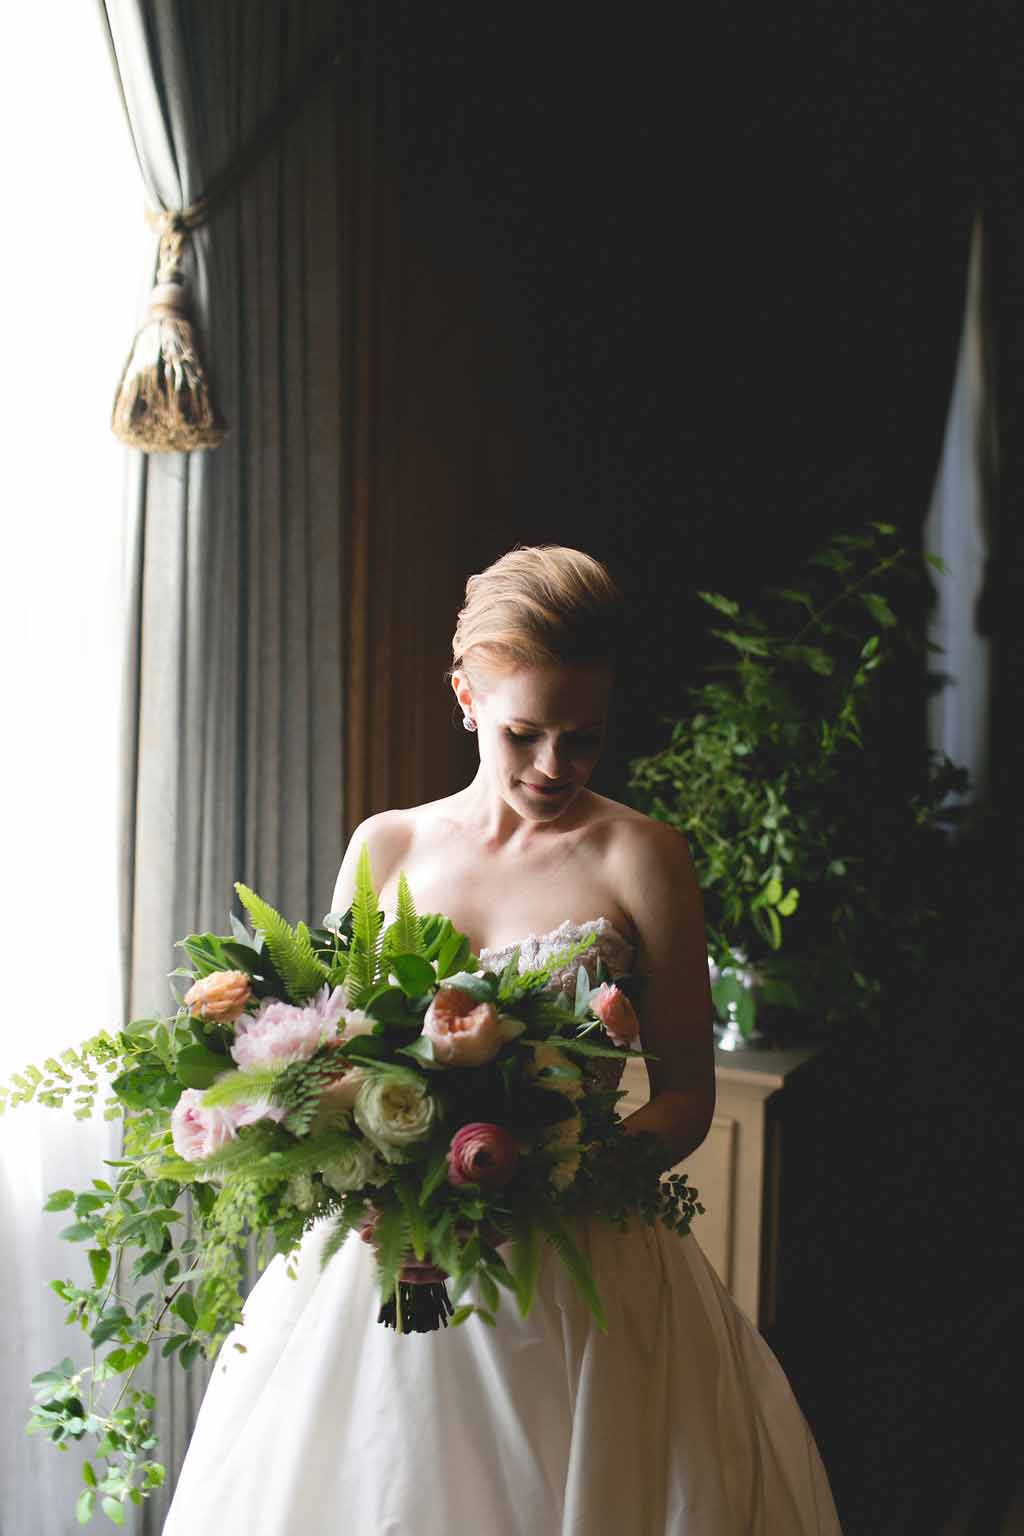 Bella Fiori, Seattle Wedding Florist, Fairmont Olympic Hotel - Large and lush bridal bouquet with maiden hair ferns, vines, peach garden roses, ranunculus, peonies